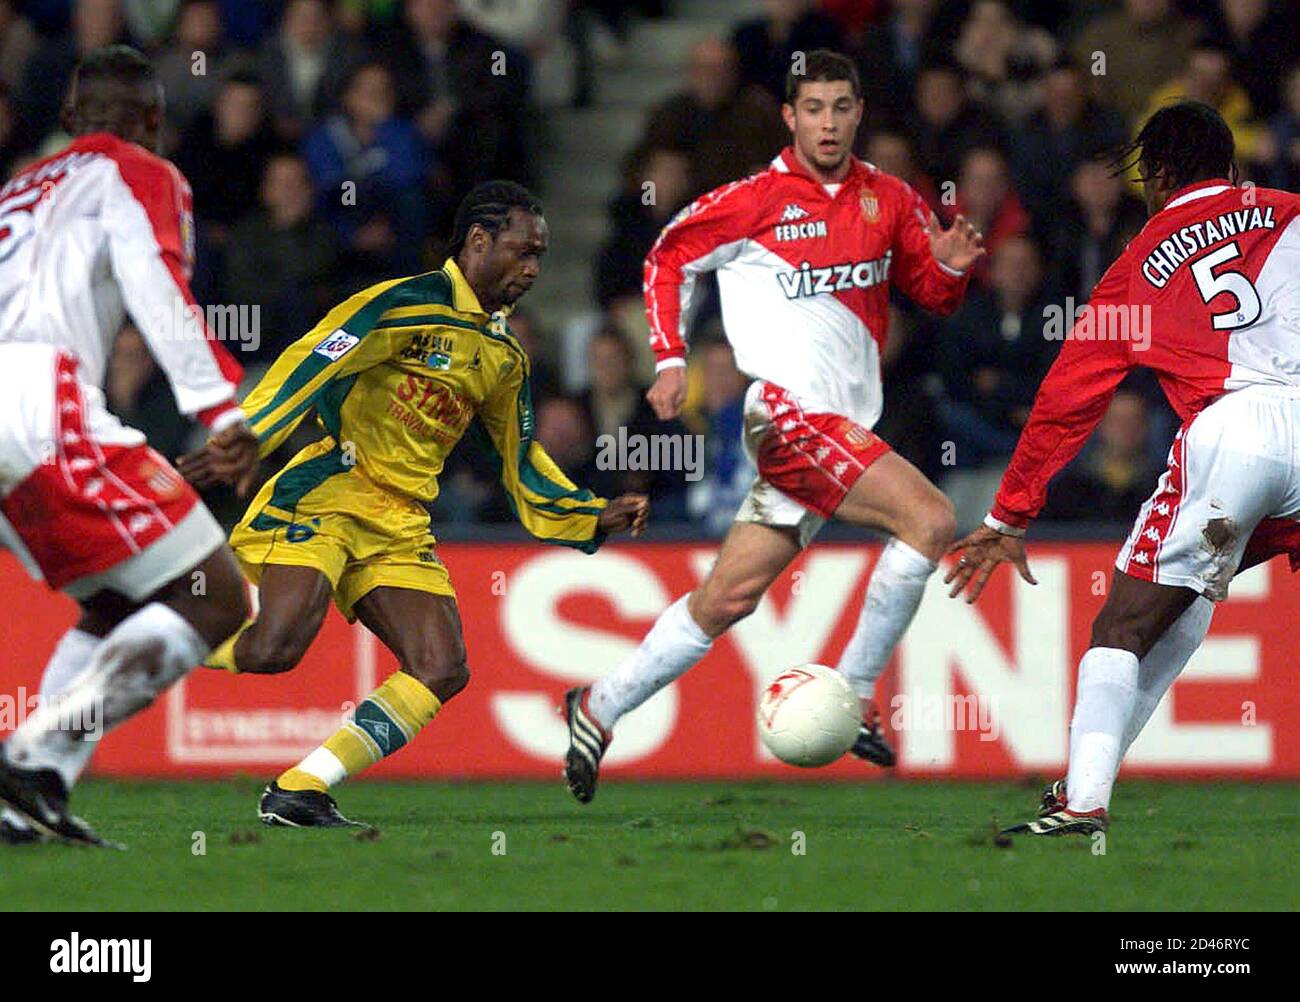 Salomon Olembe of Nantes (2L) takes the ball between Martin Djetou (L),  Philippe Chisitanval (R) and Ousman Dabo of Monaco during their French  first division match at the ' la Beaujoire' stadium